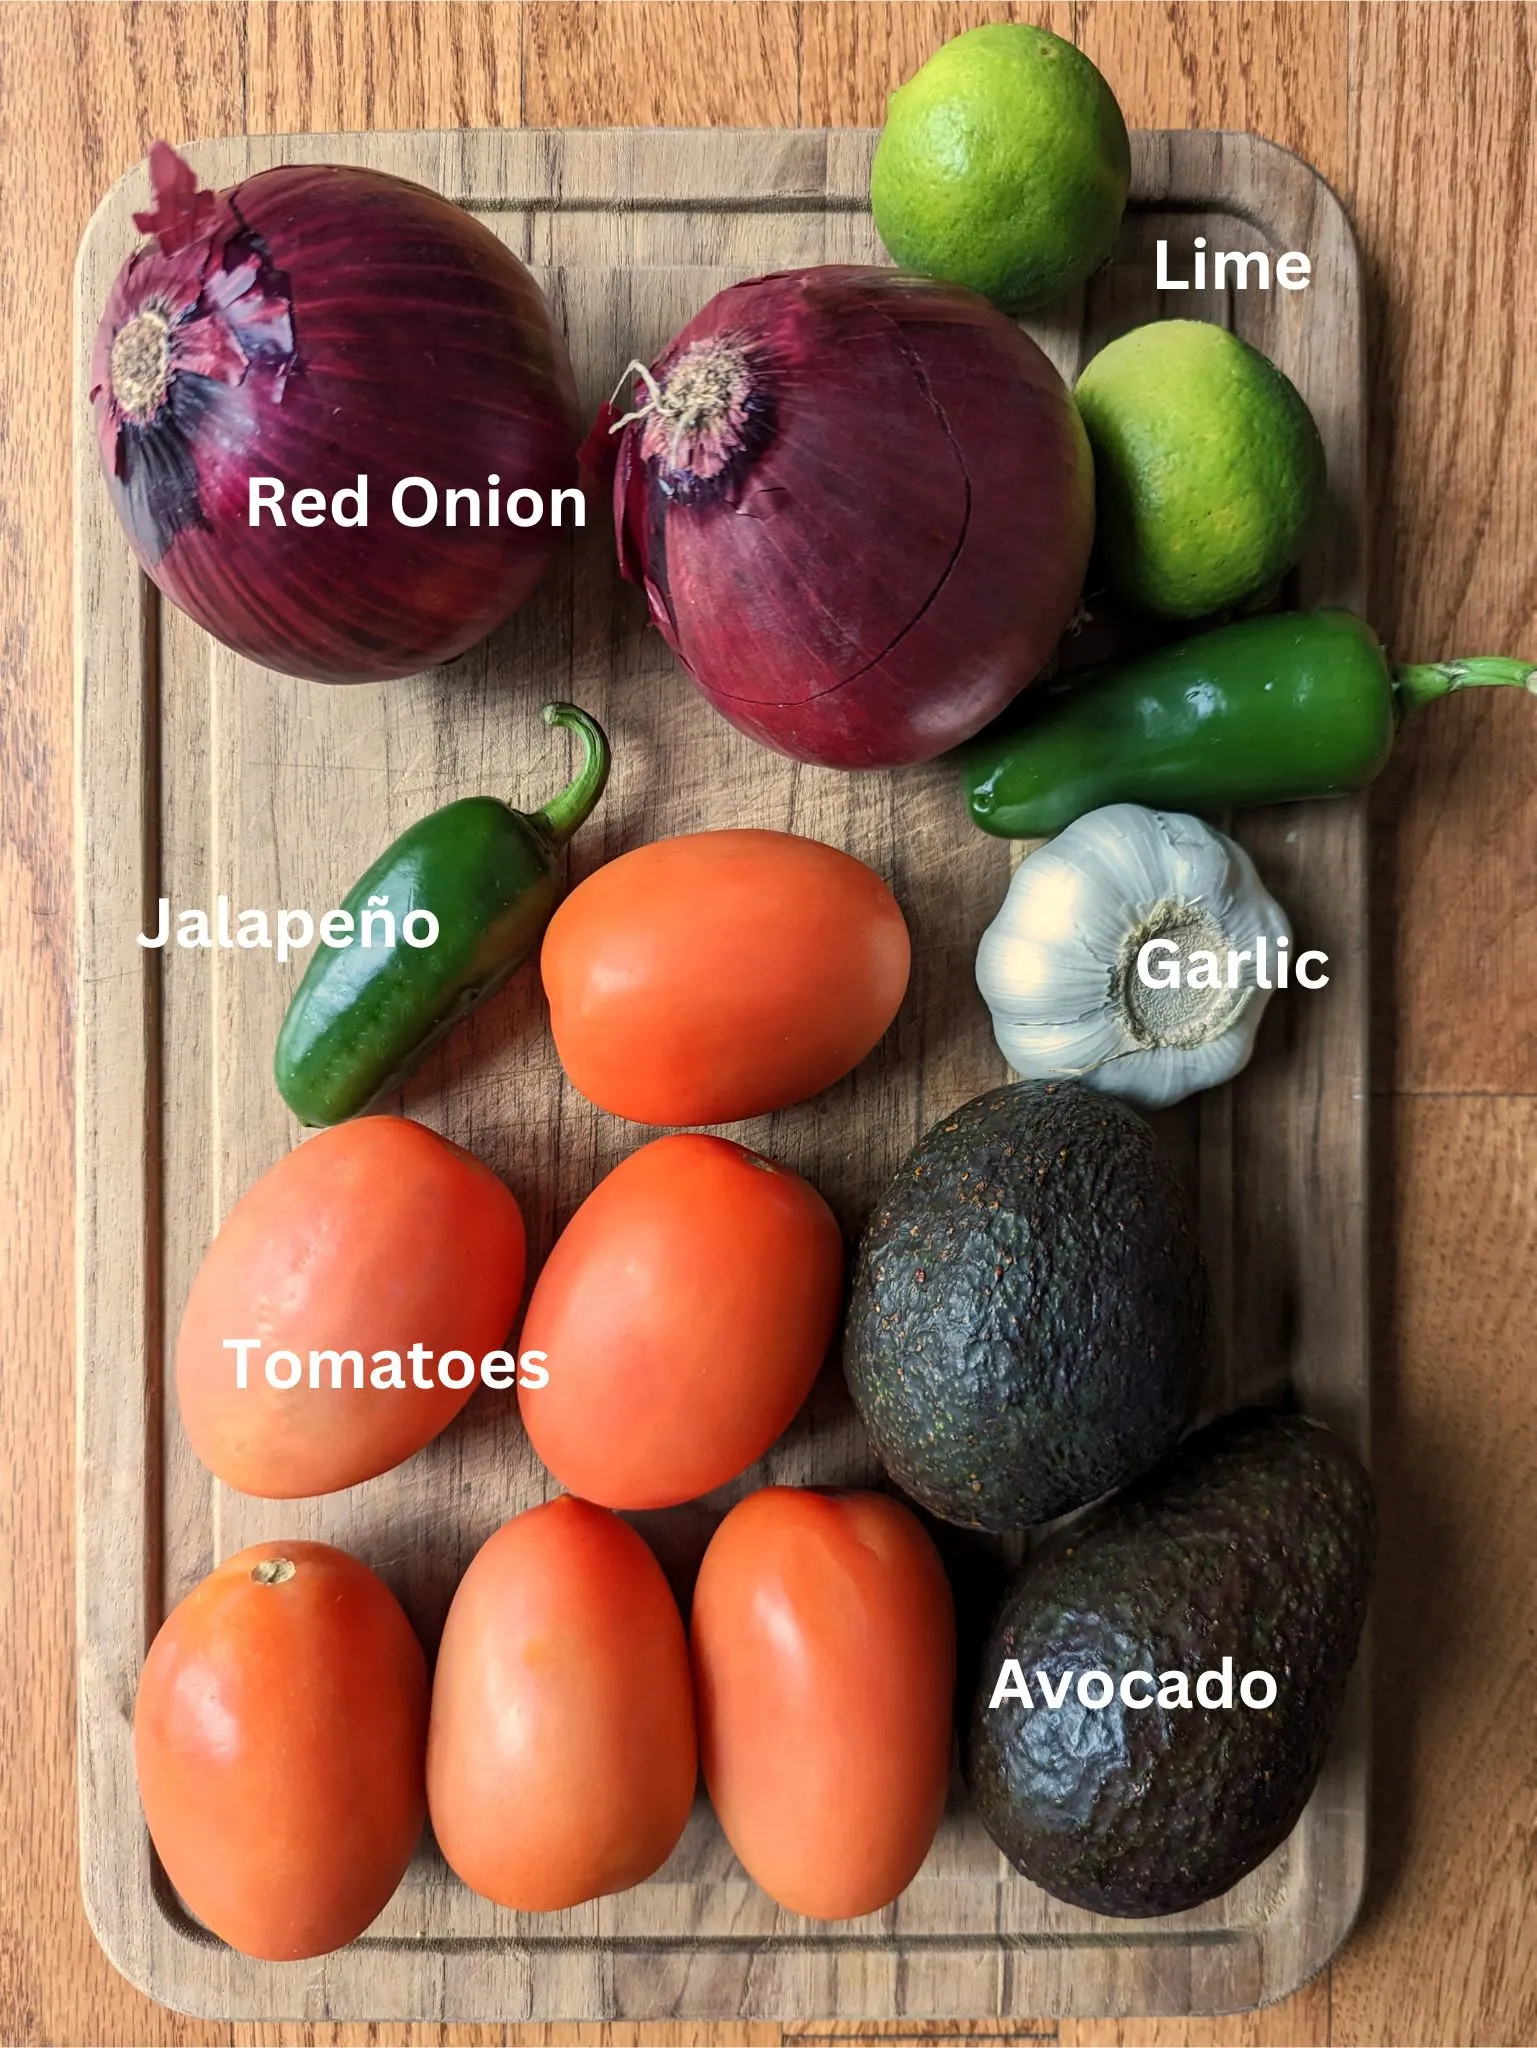 The ingredients for chunky salsa.